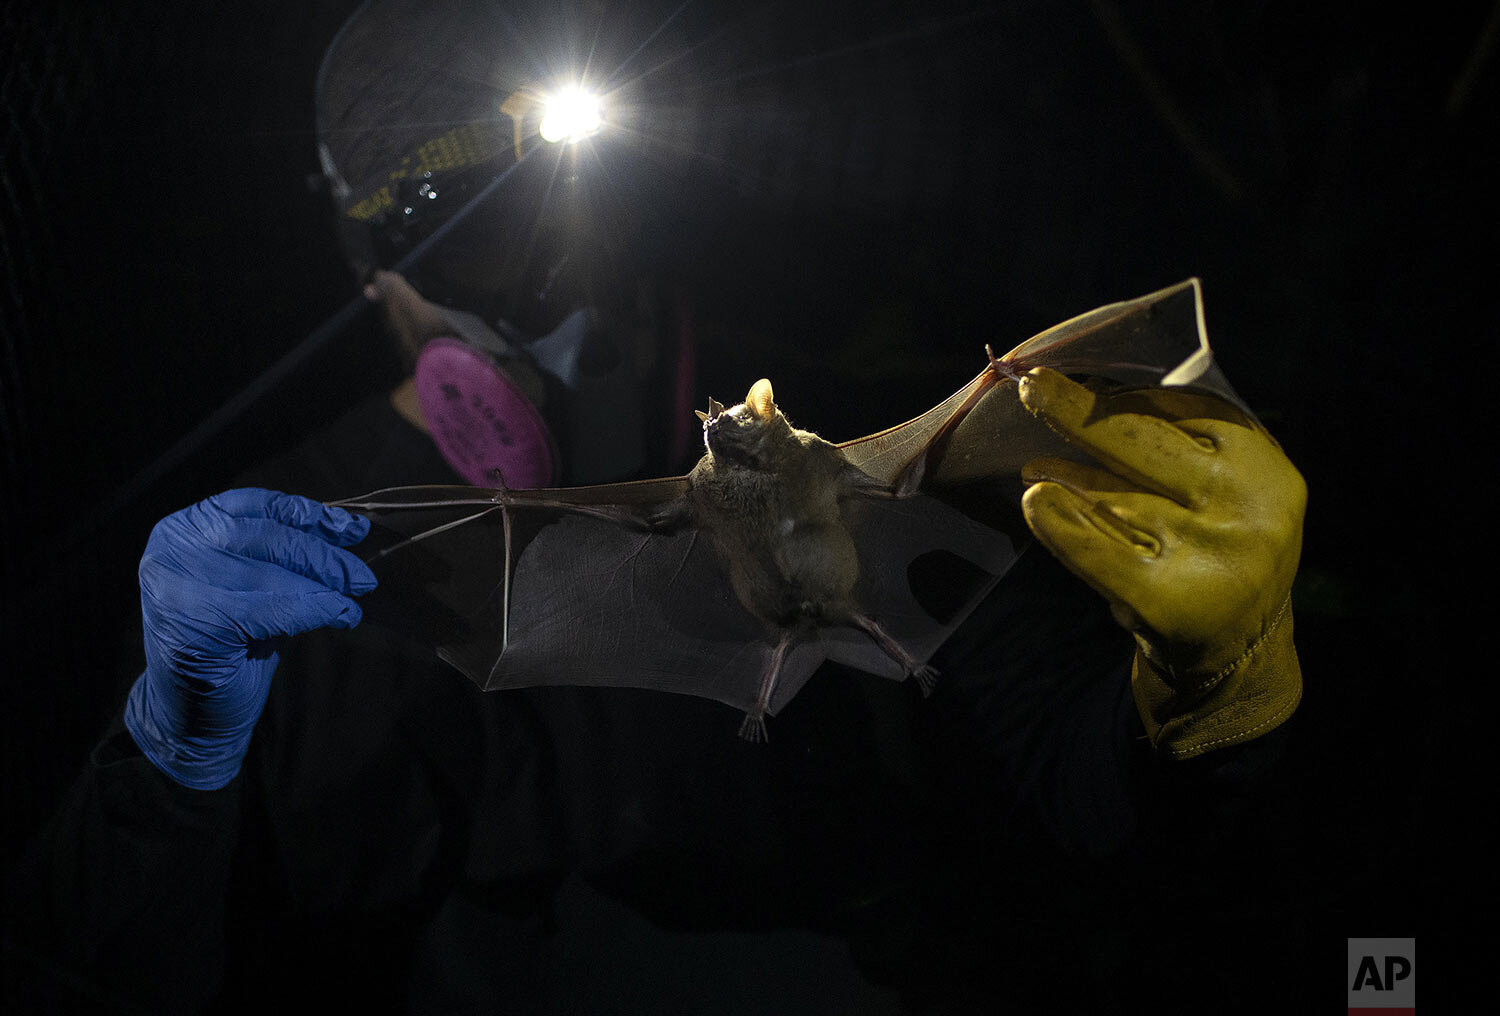  A researcher for Brazil's state-run Fiocruz Institute holds a bat captured in the Atlantic Forest, at Pedra Branca state park, near Rio de Janeiro, Tuesday, Nov. 17, 2020. Researchers at the institute collect and study viruses present in wild animal